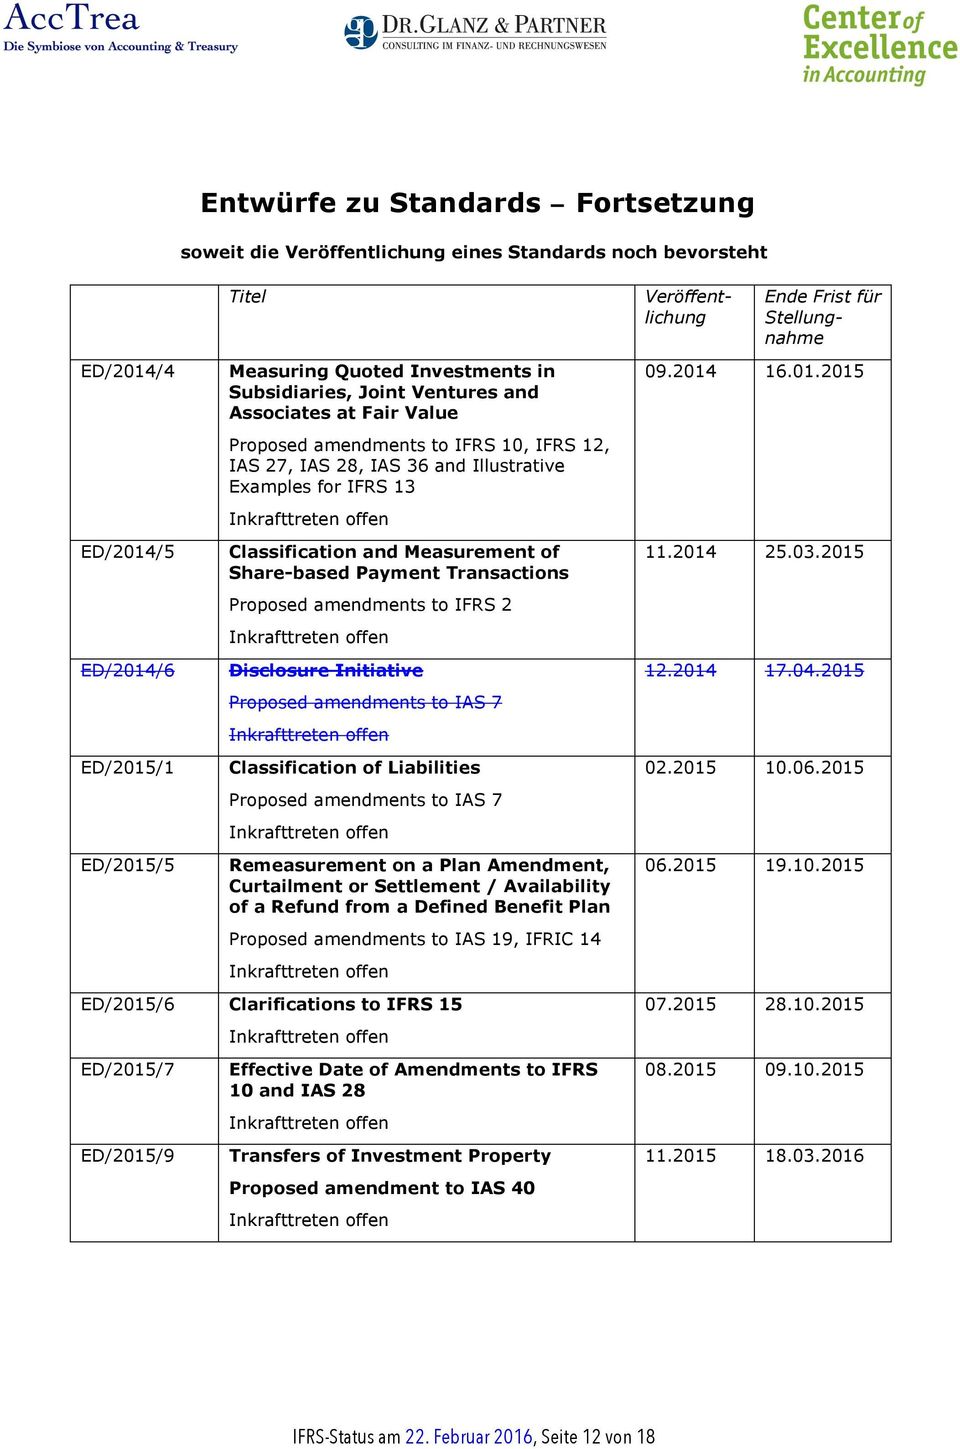 Proposed amendments to IFRS 2 09.2014 16.01.2015 11.2014 25.03.